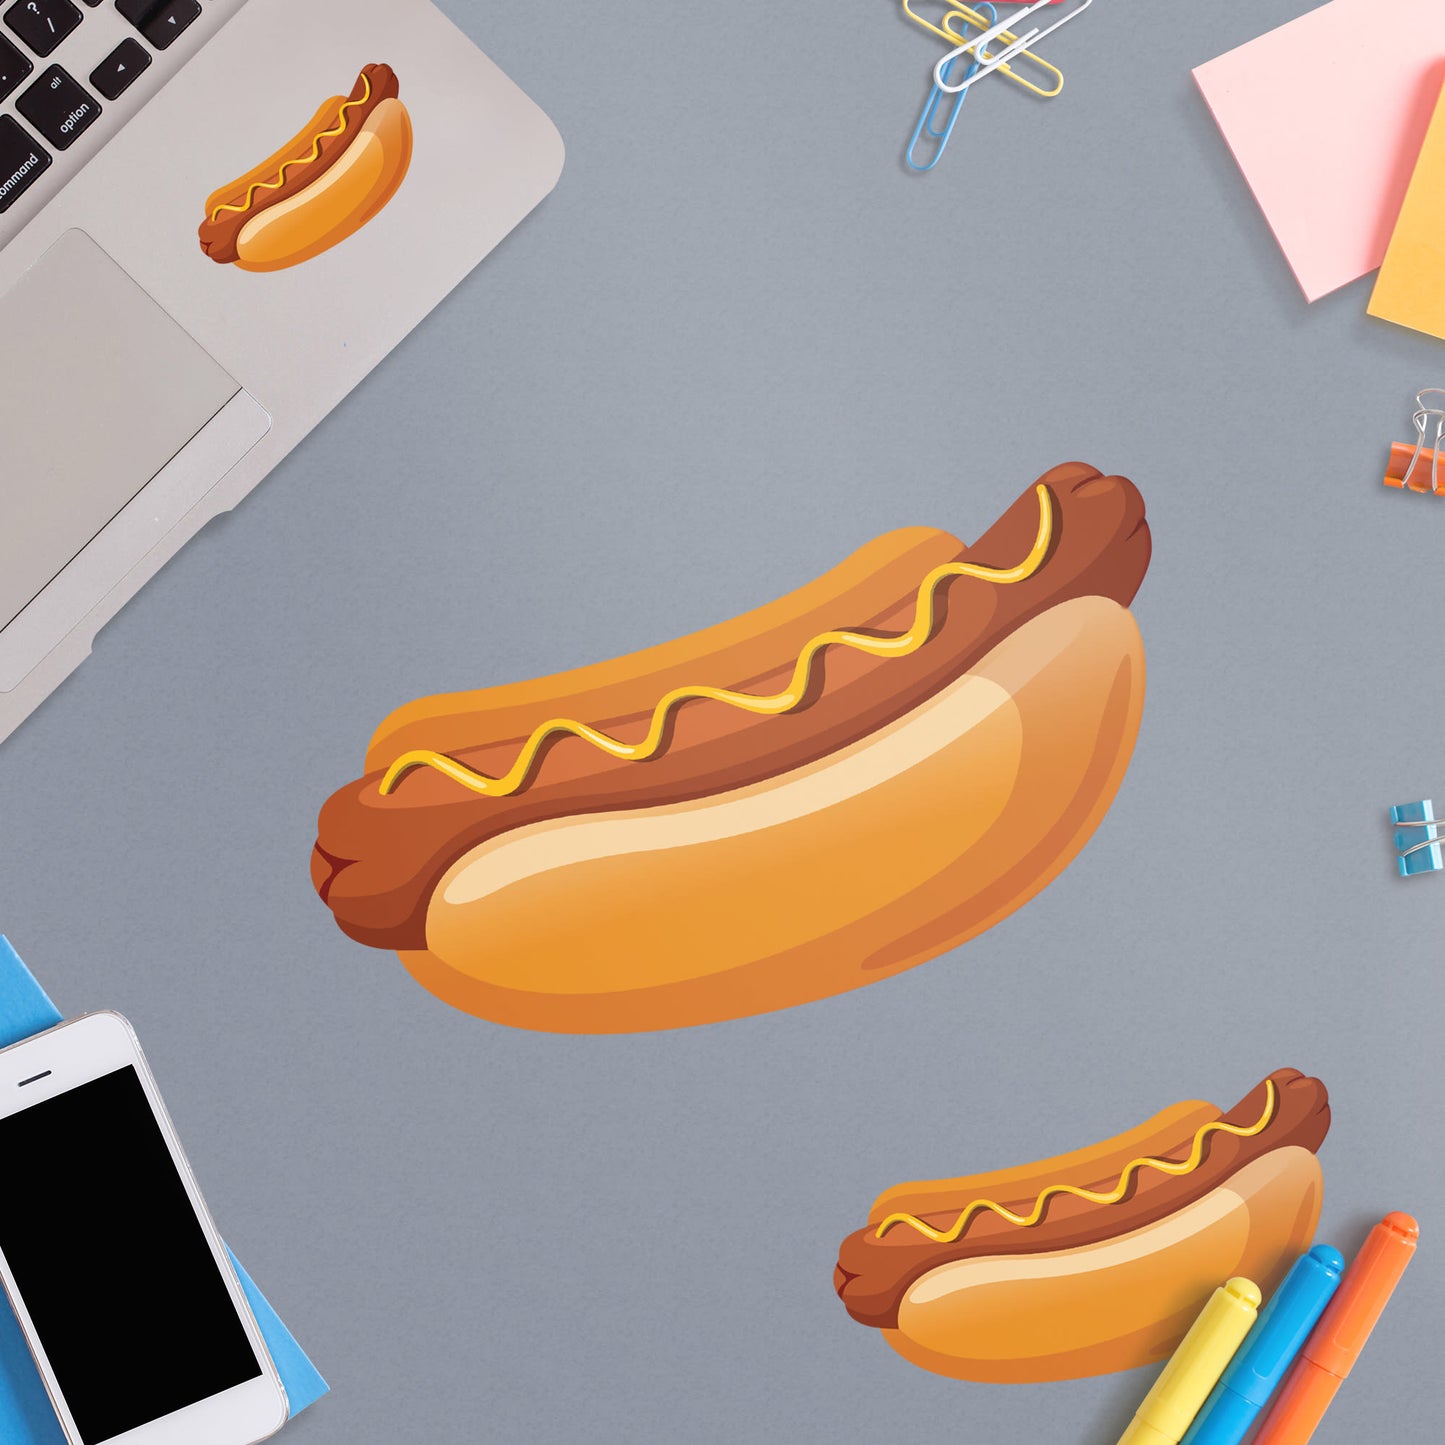 Hot Dog: Illustrated Collection - Removable Vinyl Decals